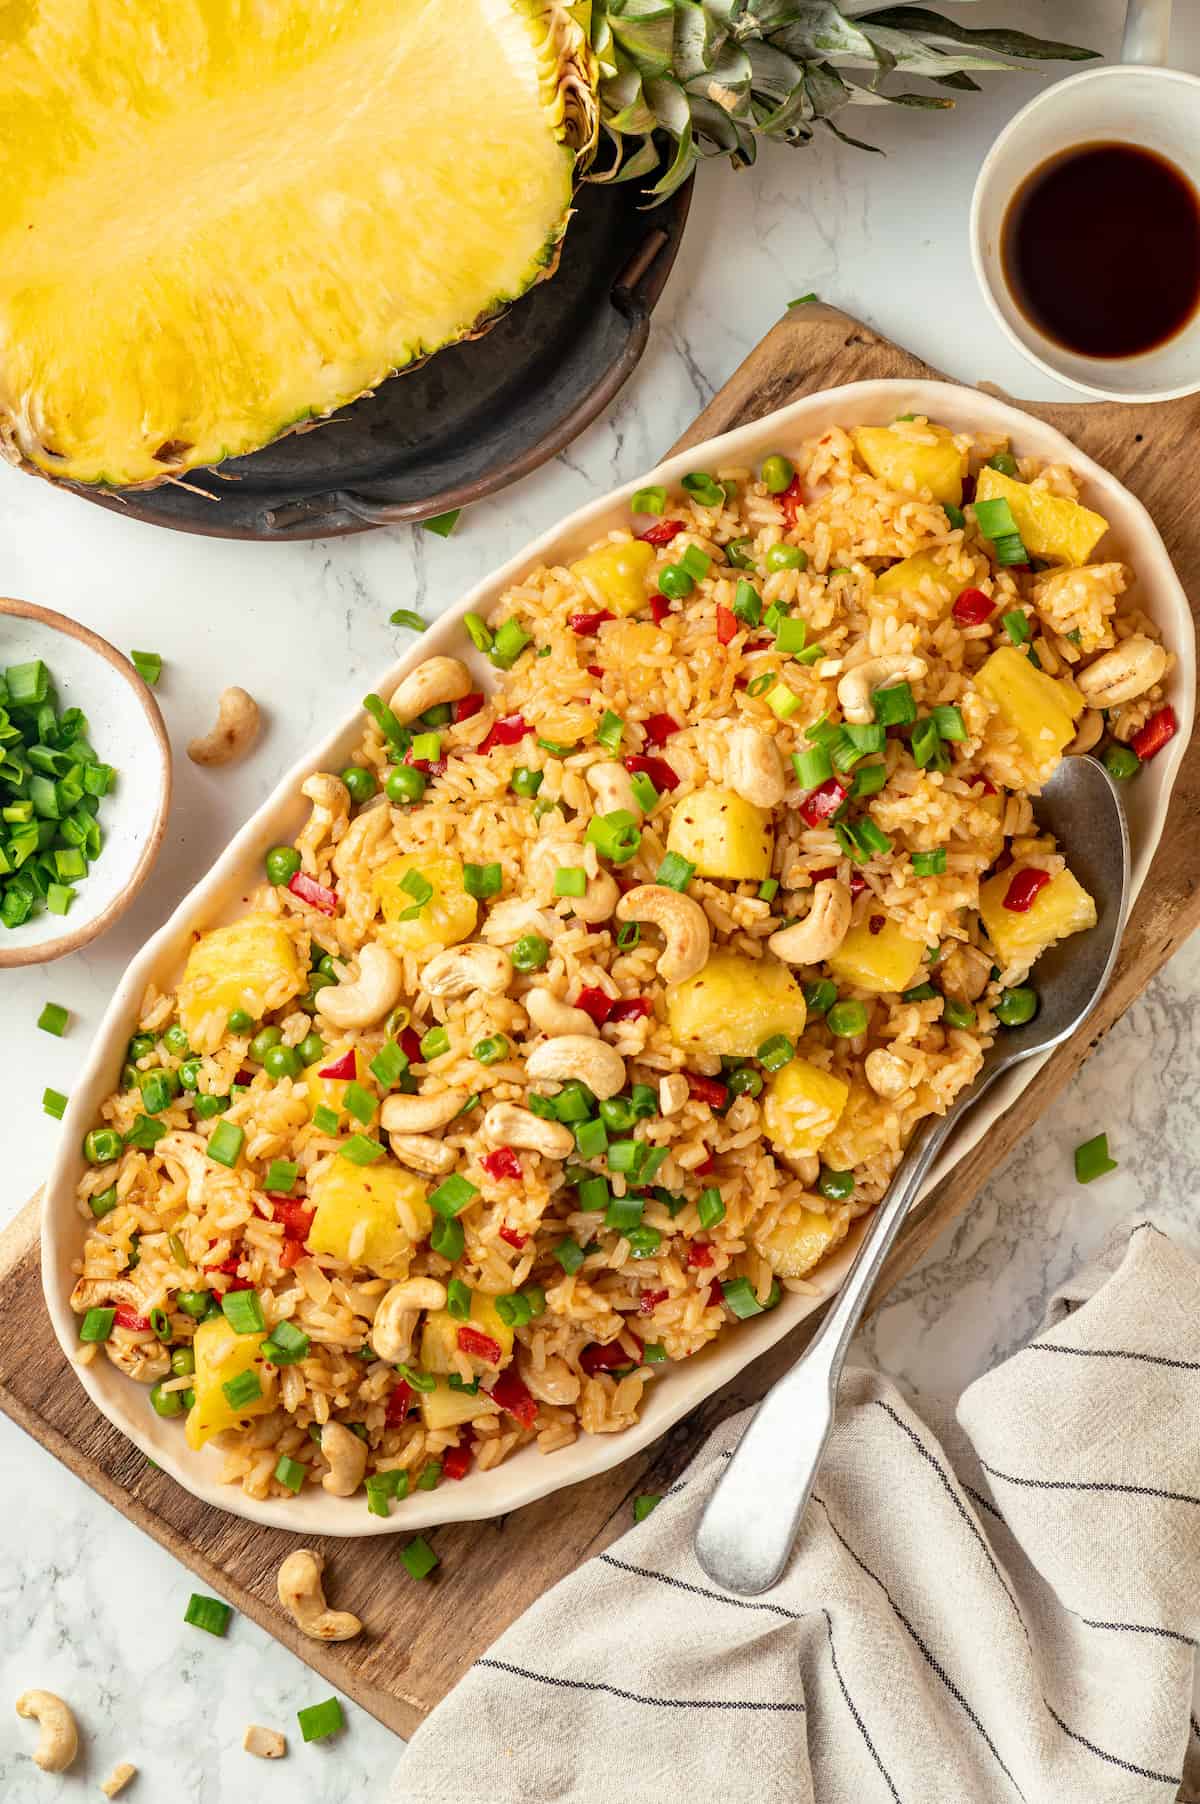 Overhead view of pineapple fried rice on platter with large spoon